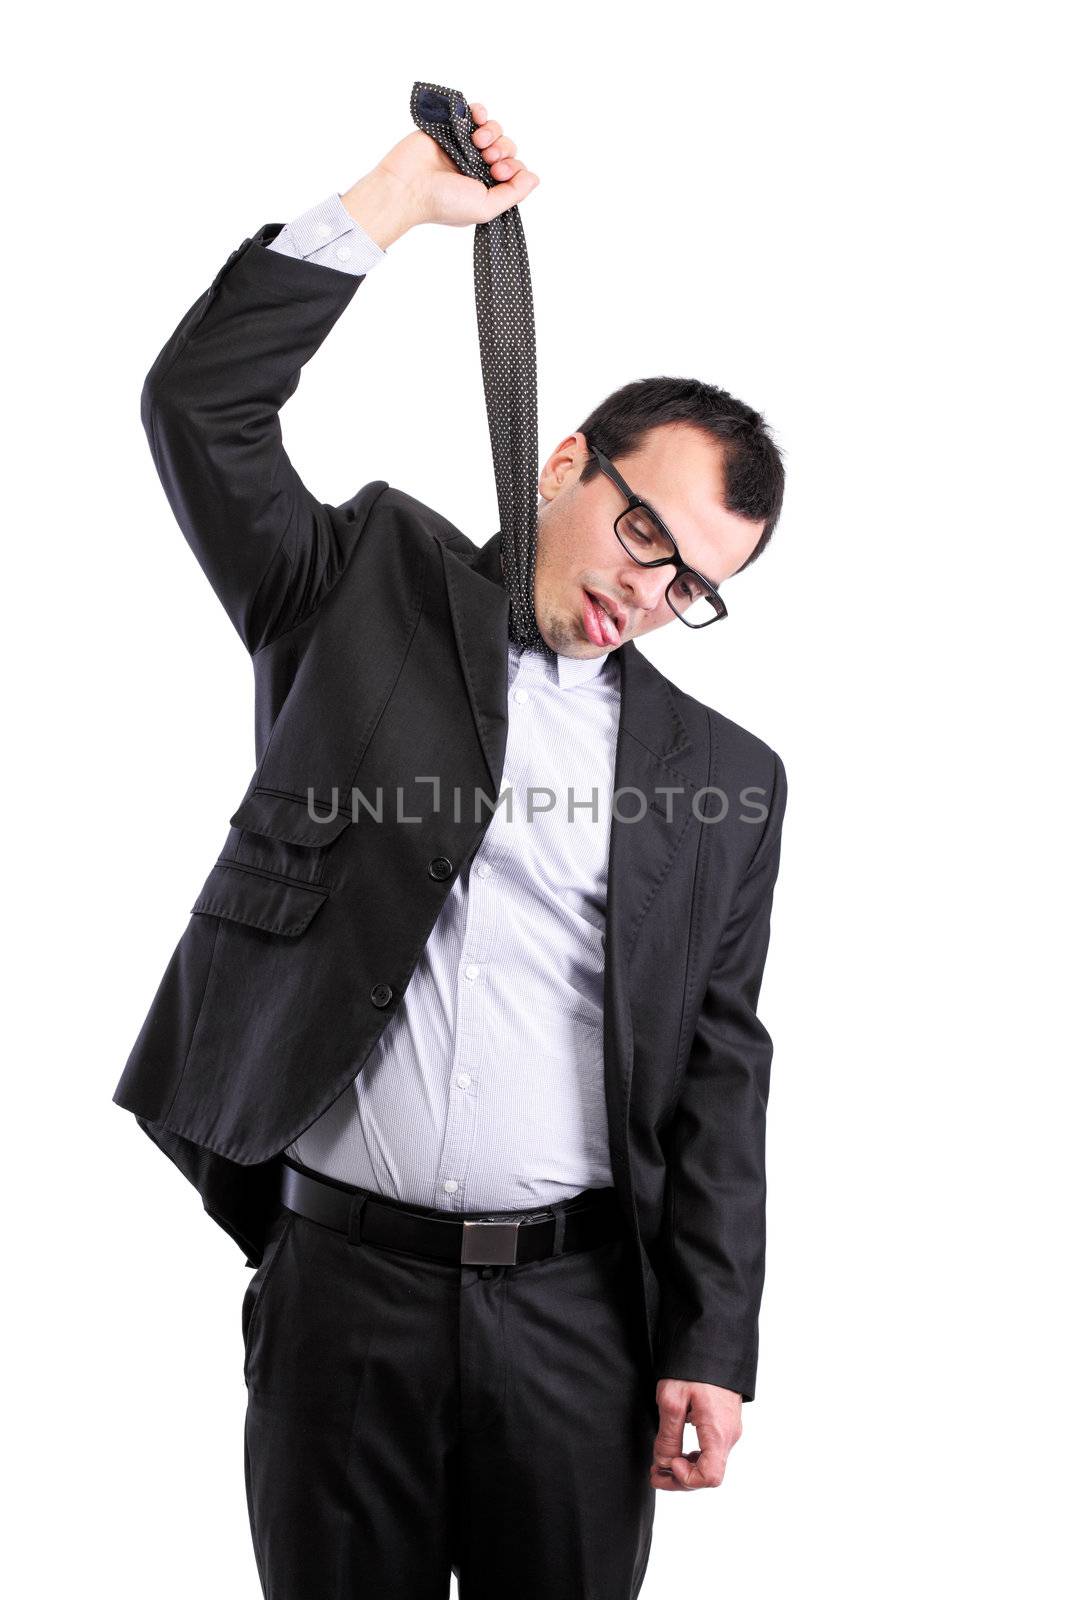 suicidal businessman hanging himself on his tie, isolated on white